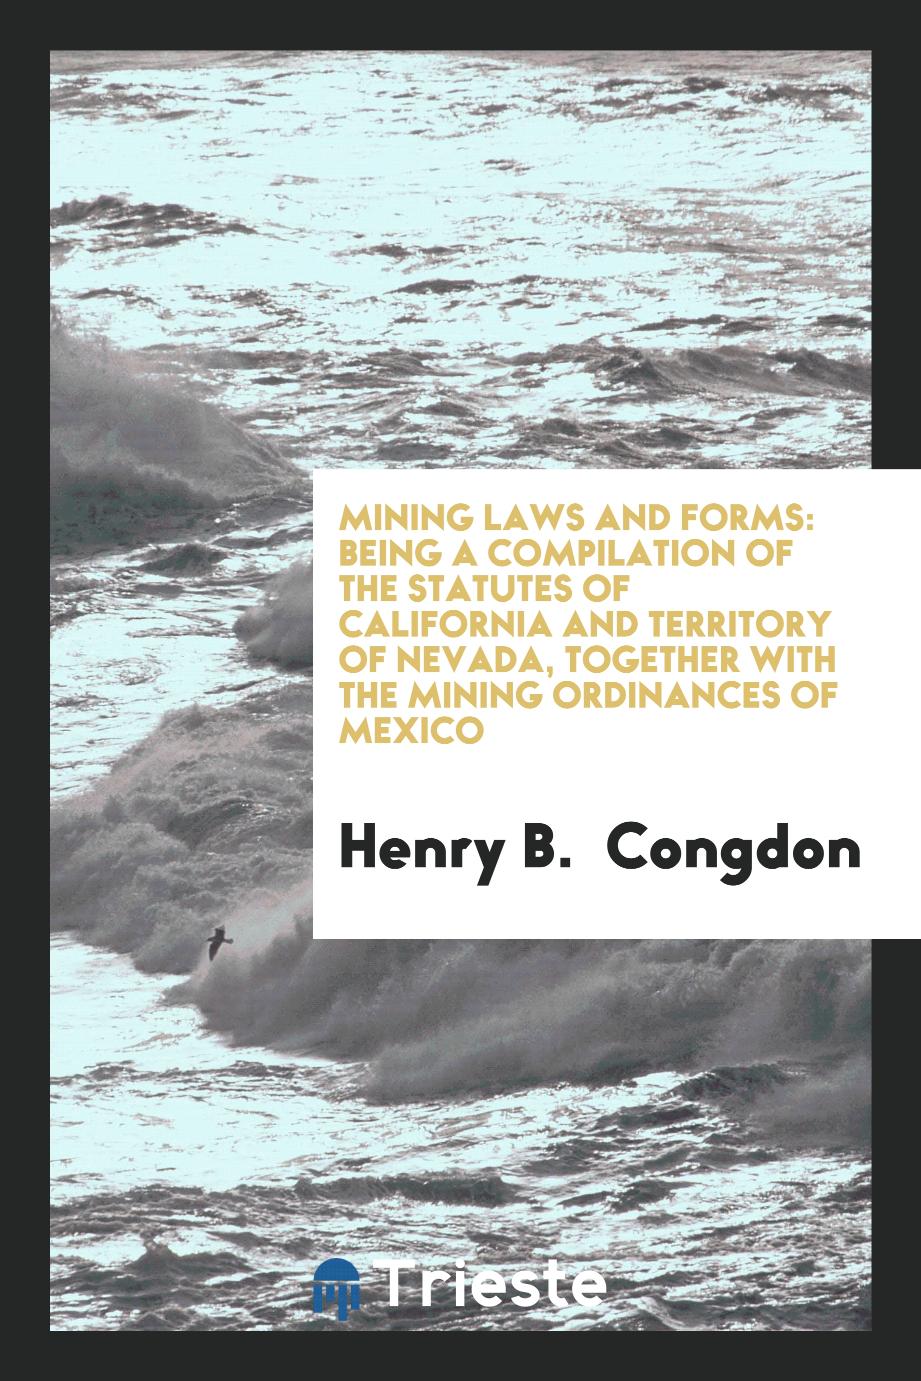 Mining Laws and Forms: Being a Compilation of the Statutes of California and Territory of Nevada, Together with the Mining Ordinances of Mexico